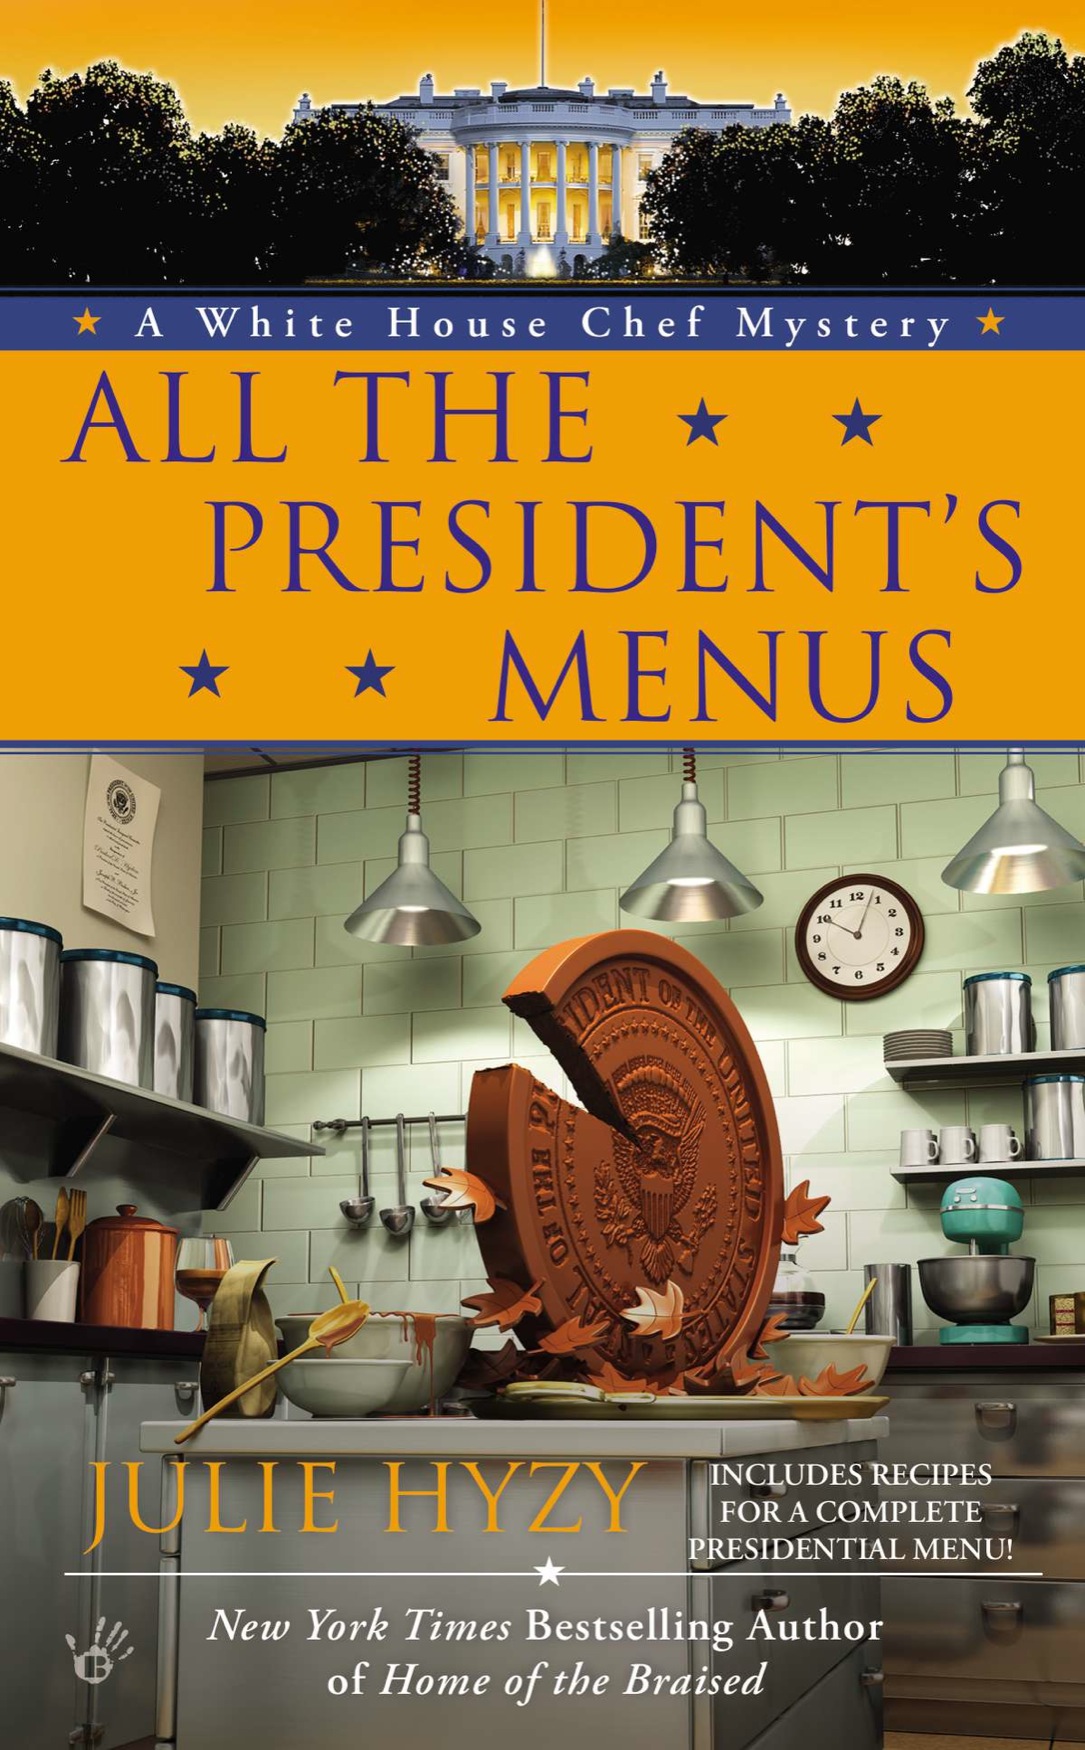 All the President’s Menus (2014) by Julie Hyzy